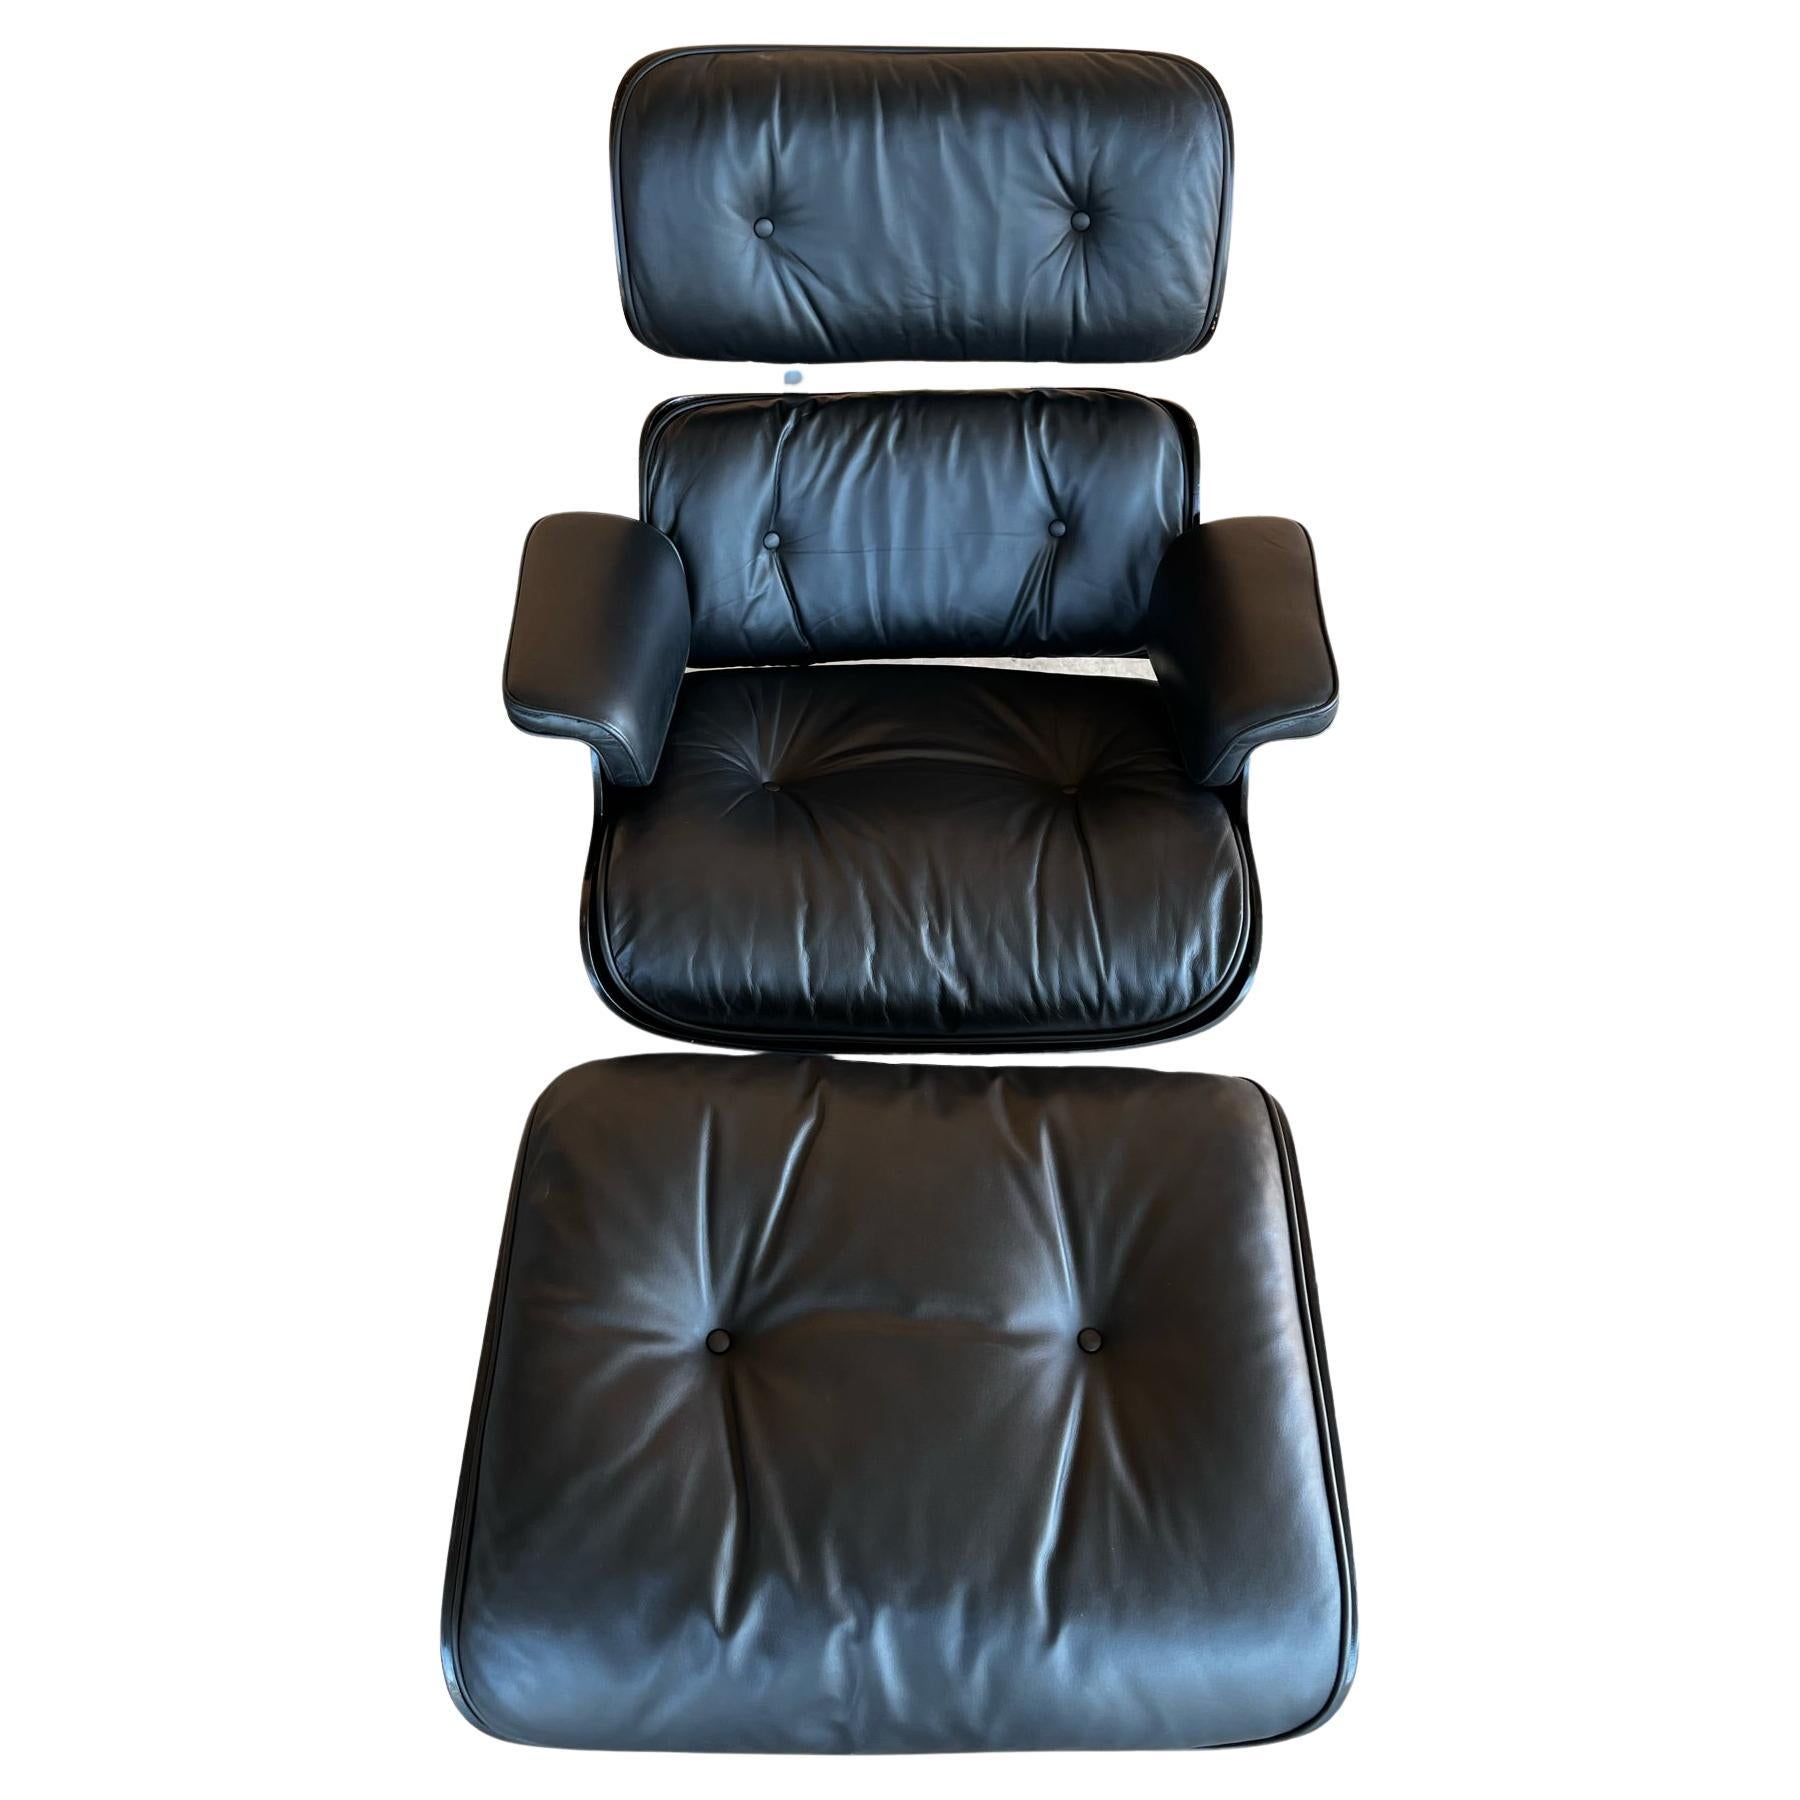 Early production 1970s Eames lounge chair 670 and ottoman 671 black leather and black wood by Herman Miller

We have found these pieces which have been produced by Herman Miller and restored by ICF in 1973 ( see the tag) which was one of four